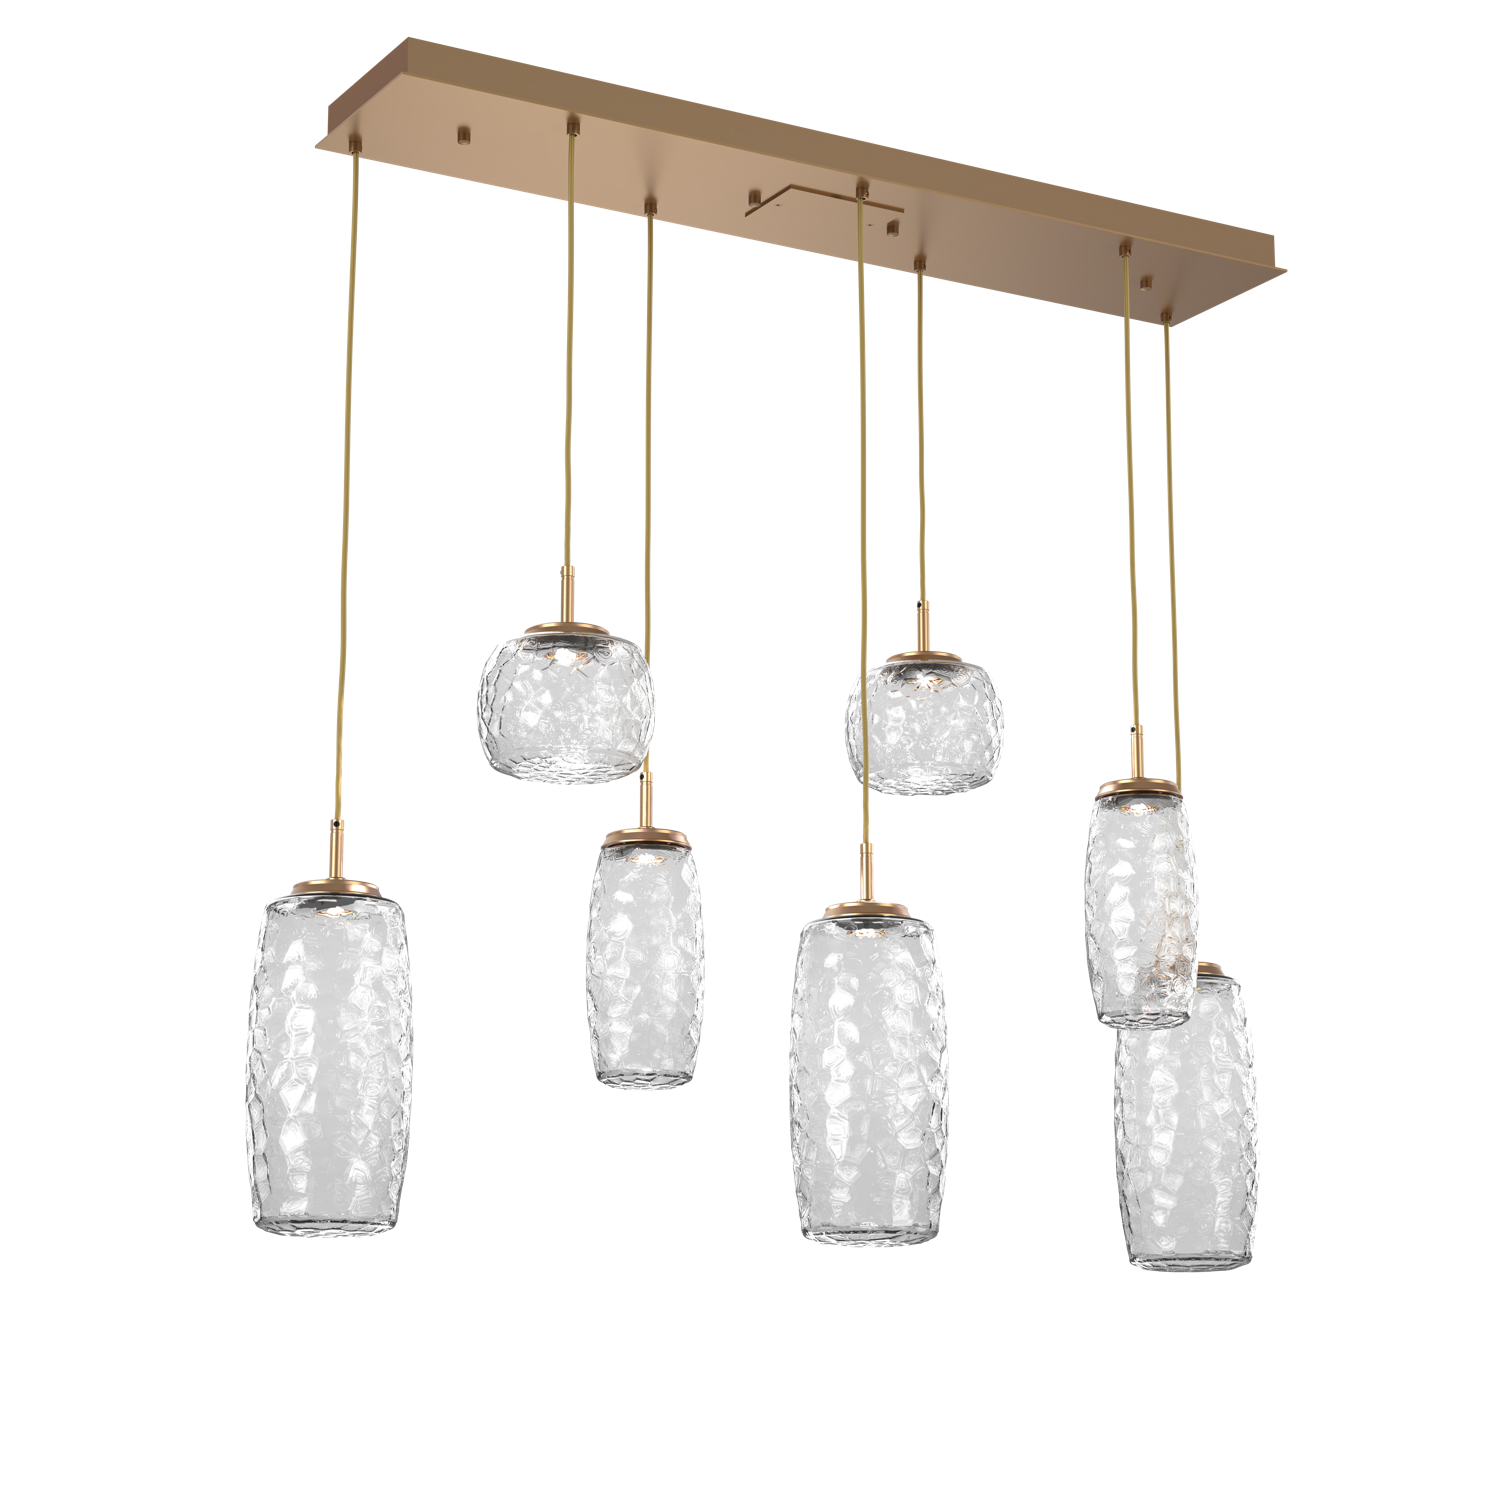 PLB0091-07-NB-C-Hammerton-Studio-Vessel-7-light-linear-multi-pendant-chandelier-with-novel-brass-finish-and-clear-blown-glass-shades-and-LED-lamping